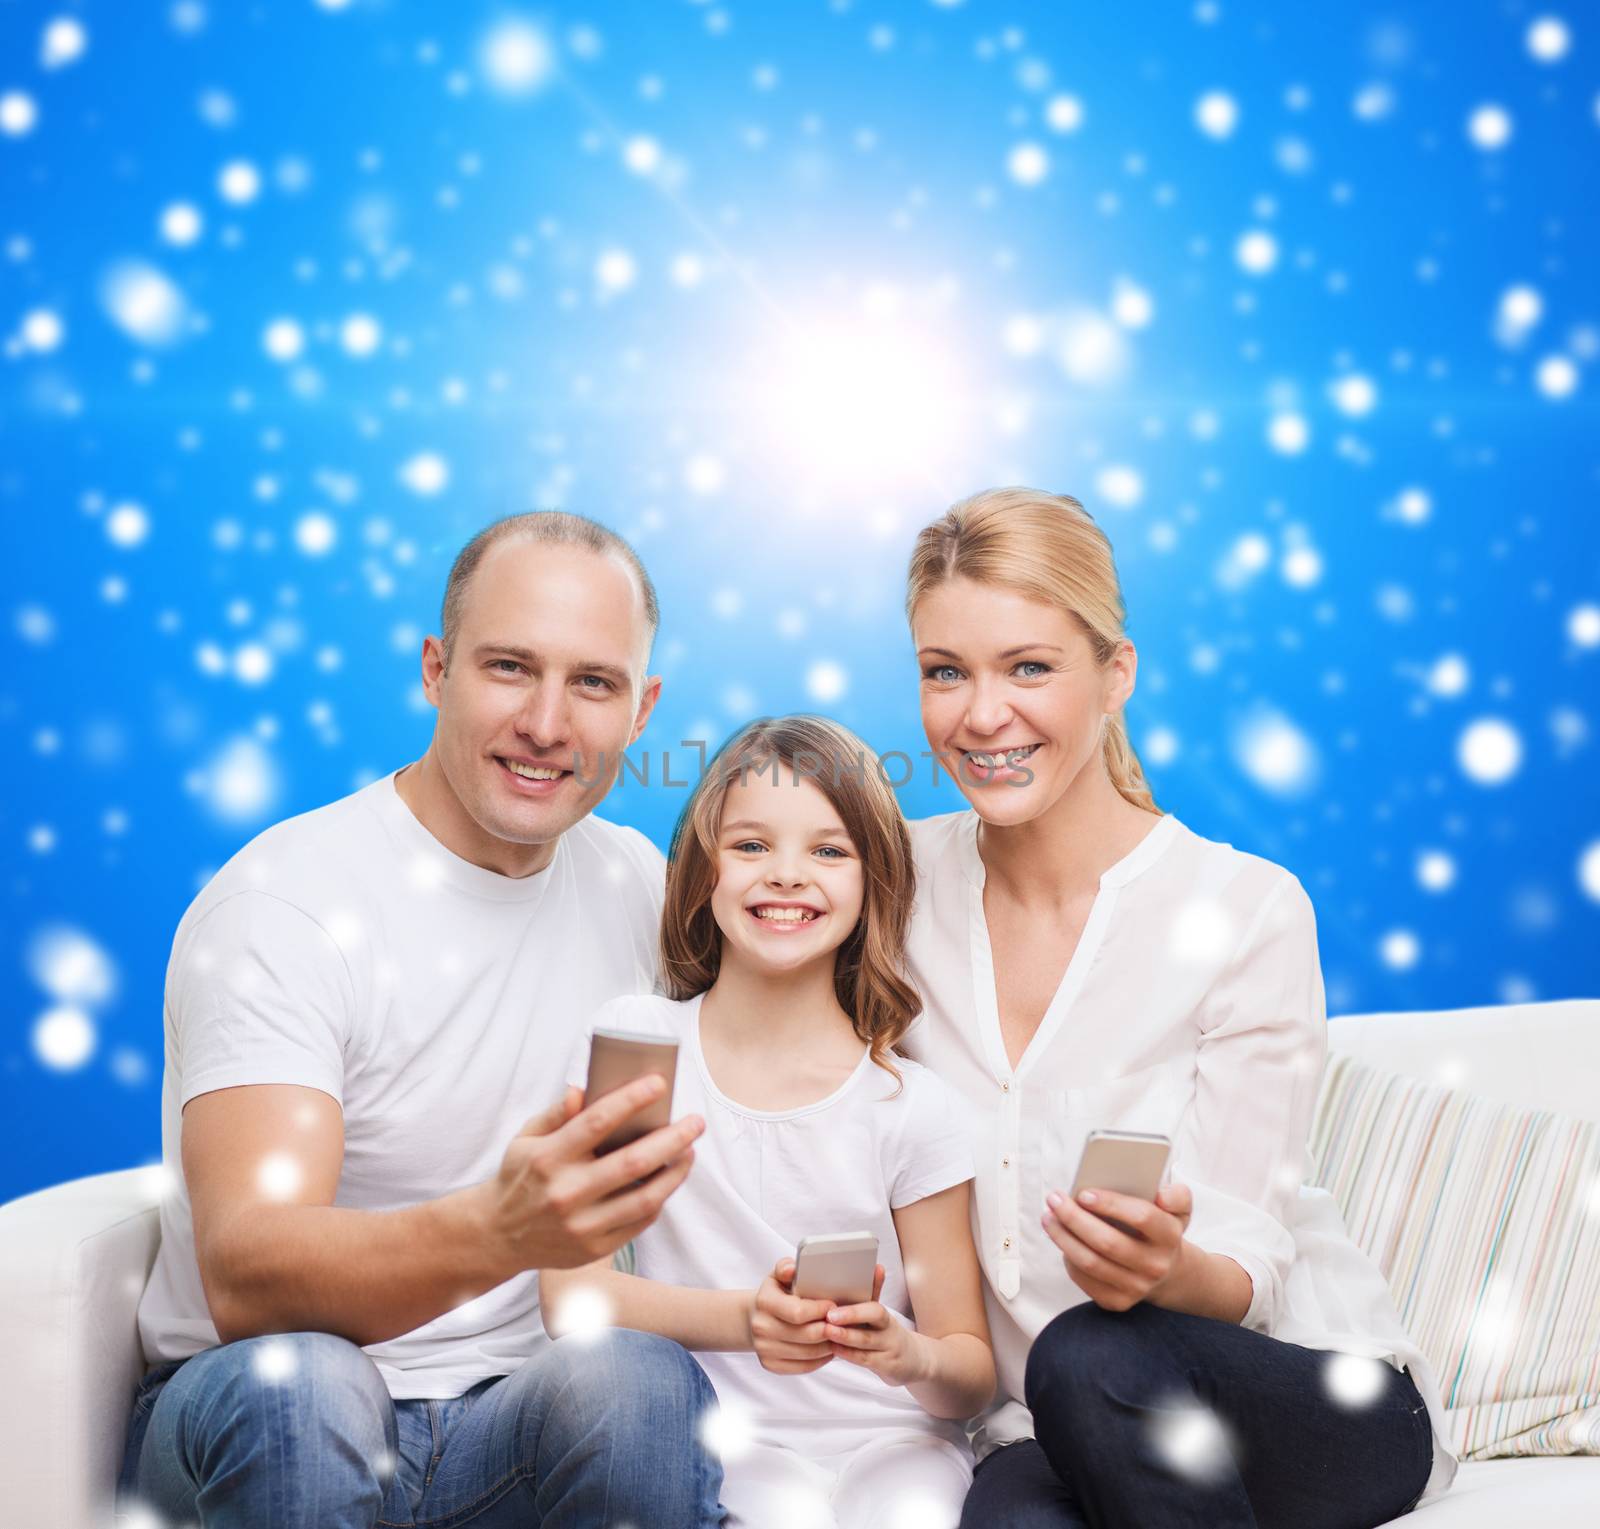 family, christmas holidays, technology and people concept - smiling mother, father and little girl with smartphones over blue snowy background